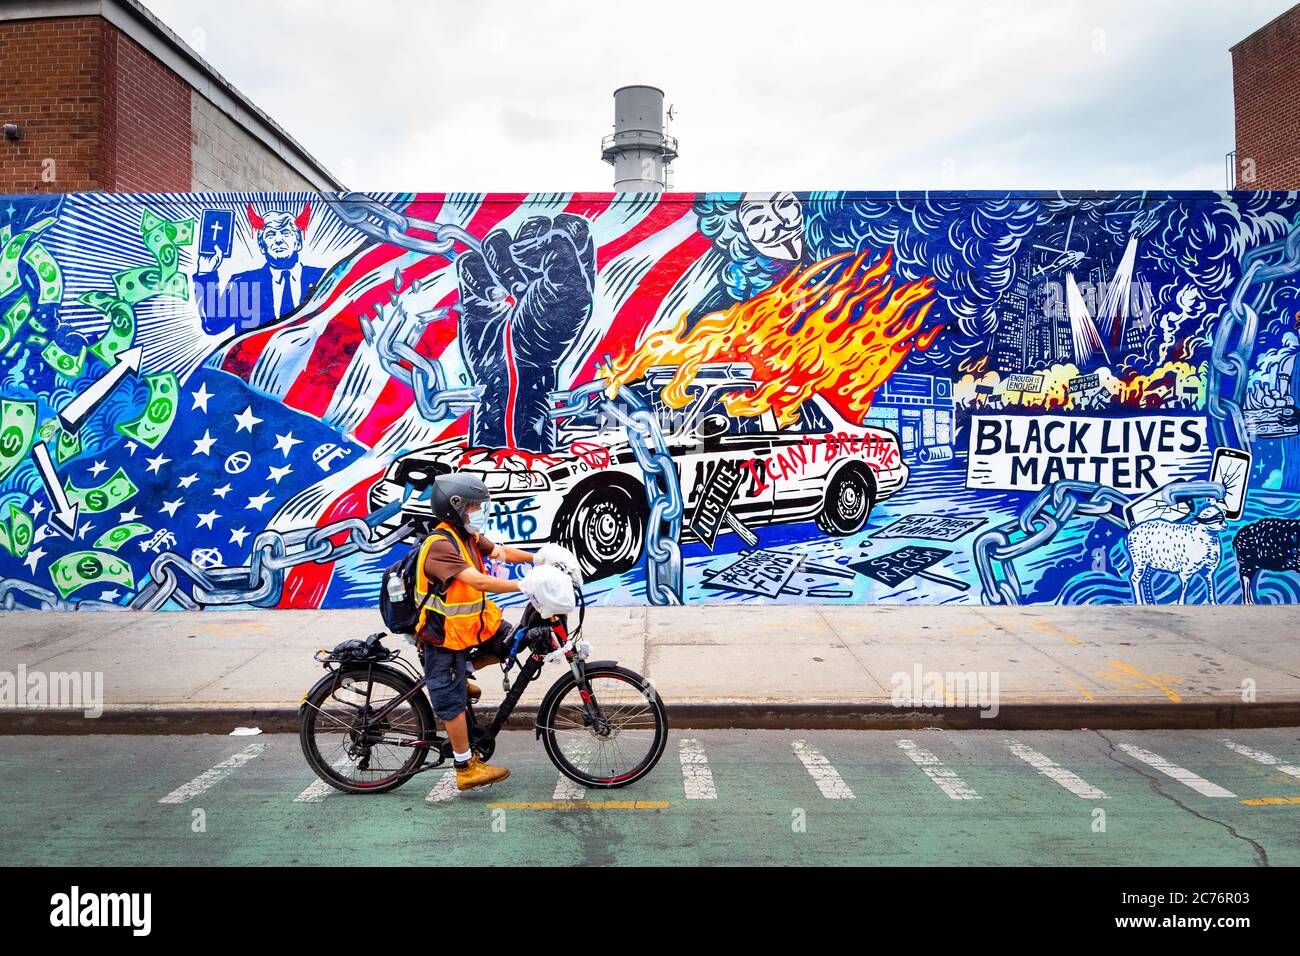 Brooklyn, New York, USA - June 27, 2020: Bicycle delivery man rides past Painted mural depicting the Black Lives Matter and covid-19 in New York. Stock Photo